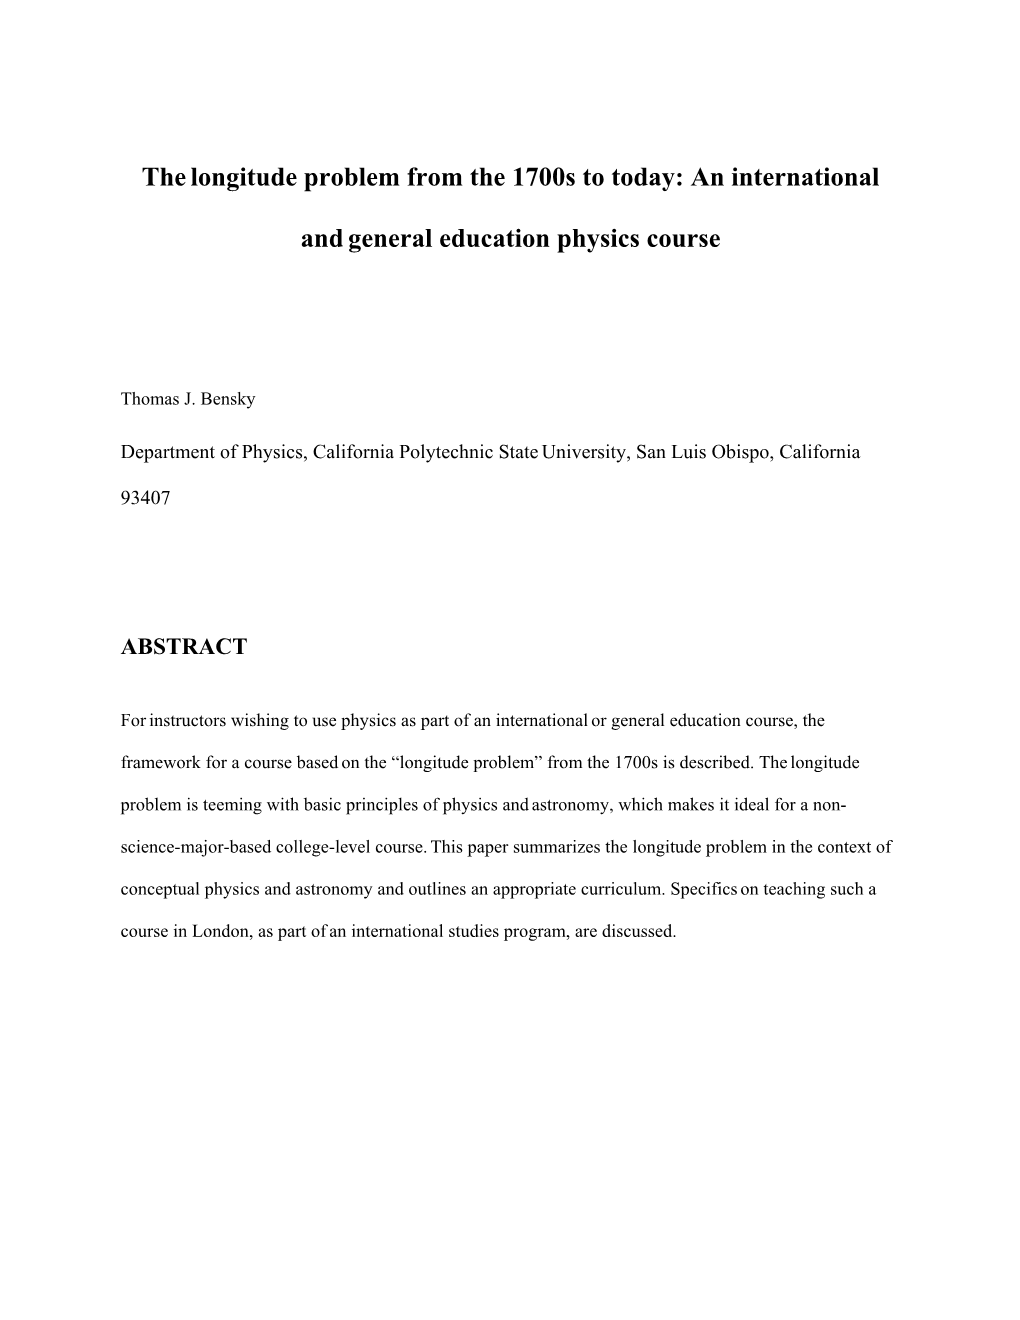 The Longitude Problem from the 1700S to Today: an International